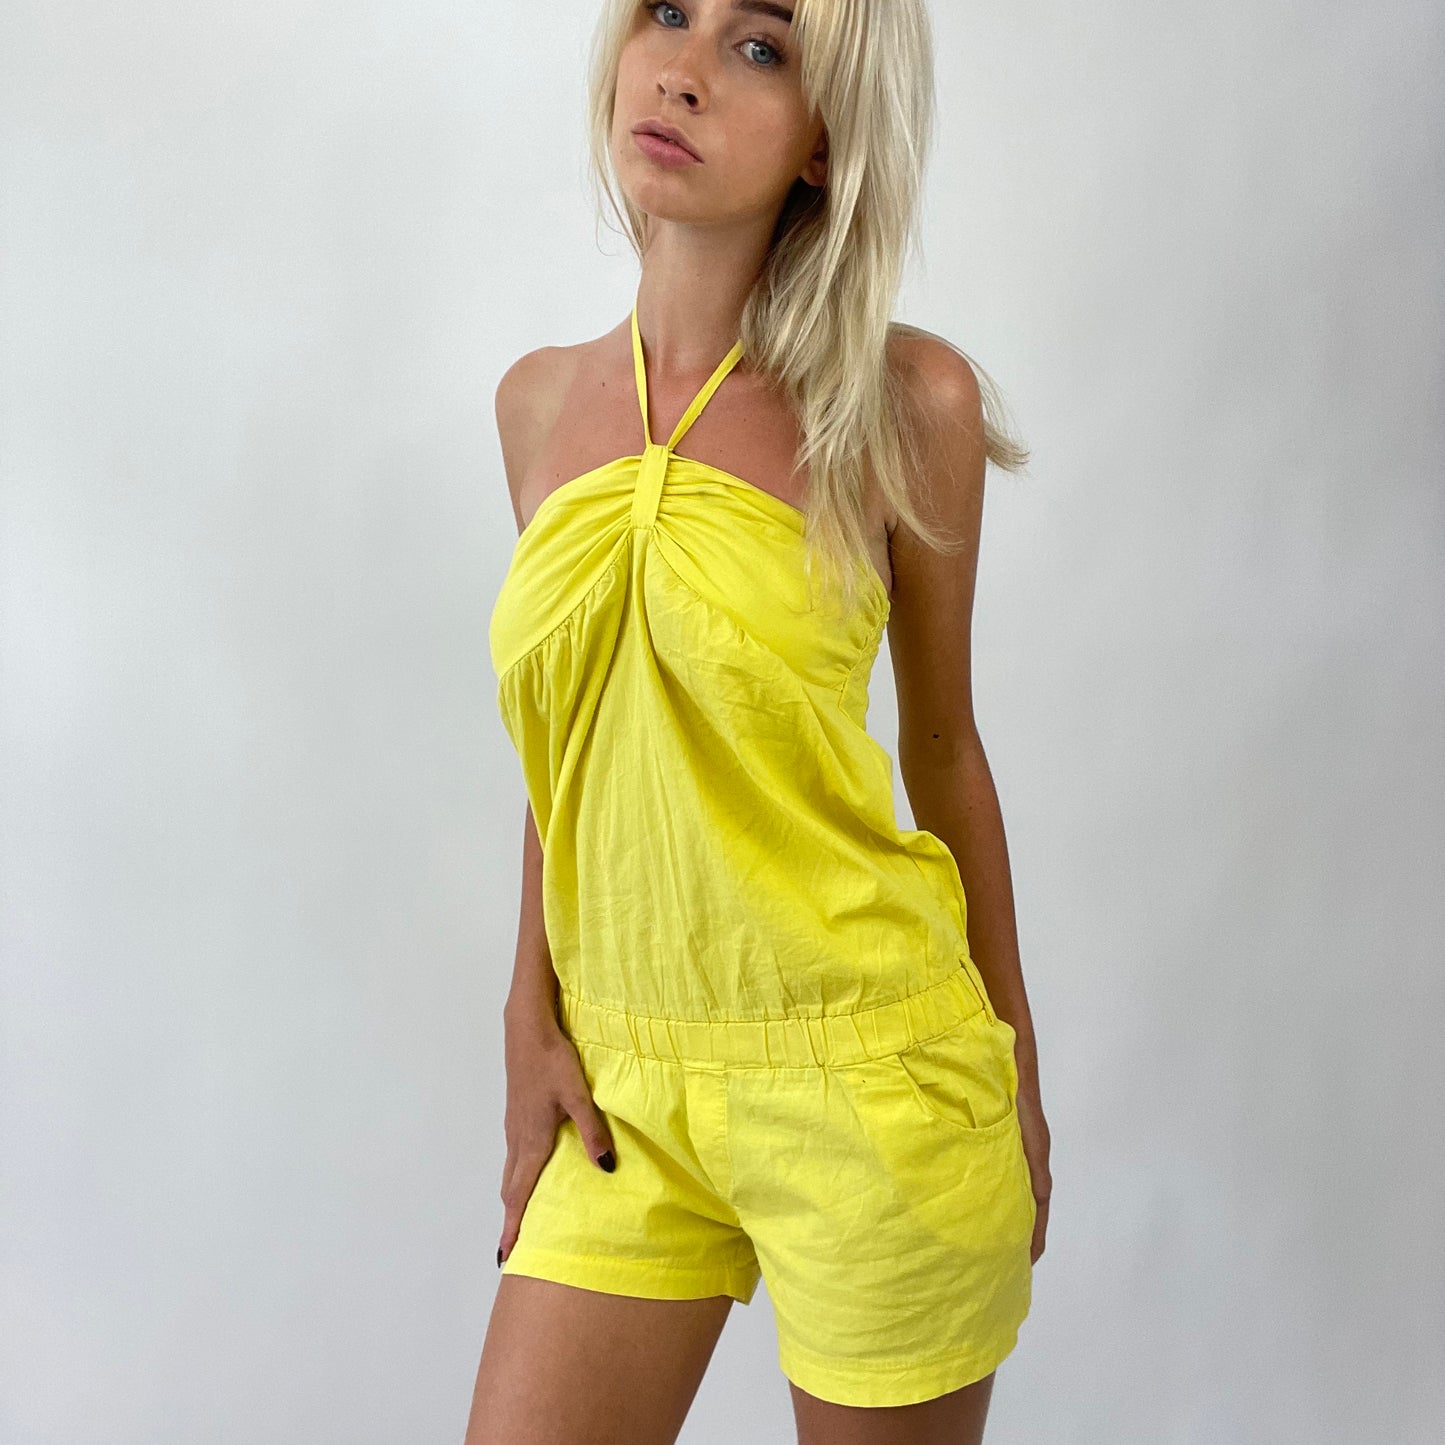 MISS REMASS DROP | small yellow playsuit